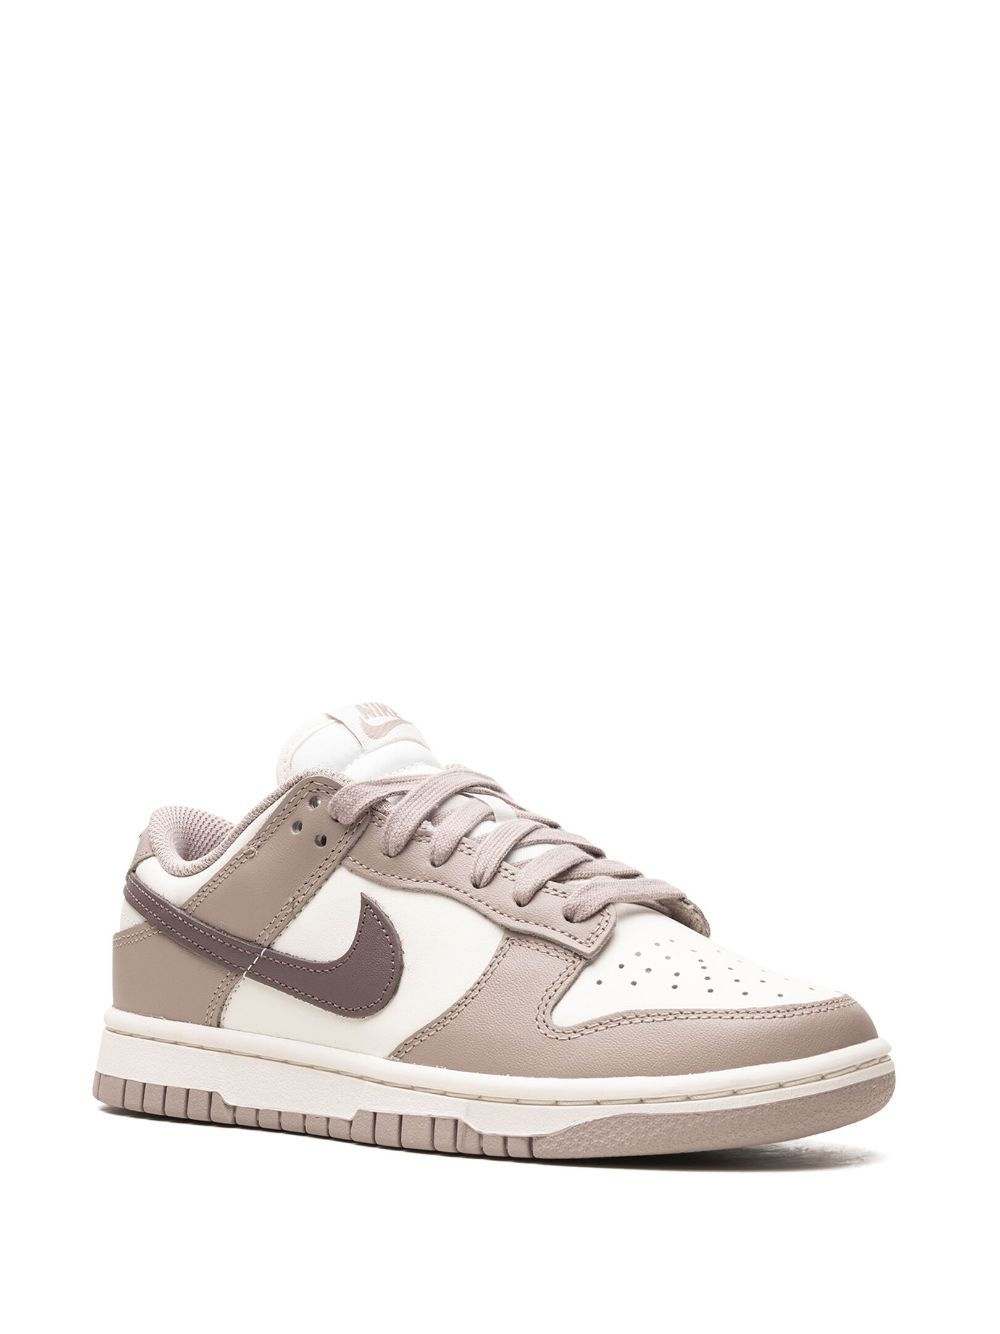 Dunk Low "Diffused Taupe" sneakers - 2